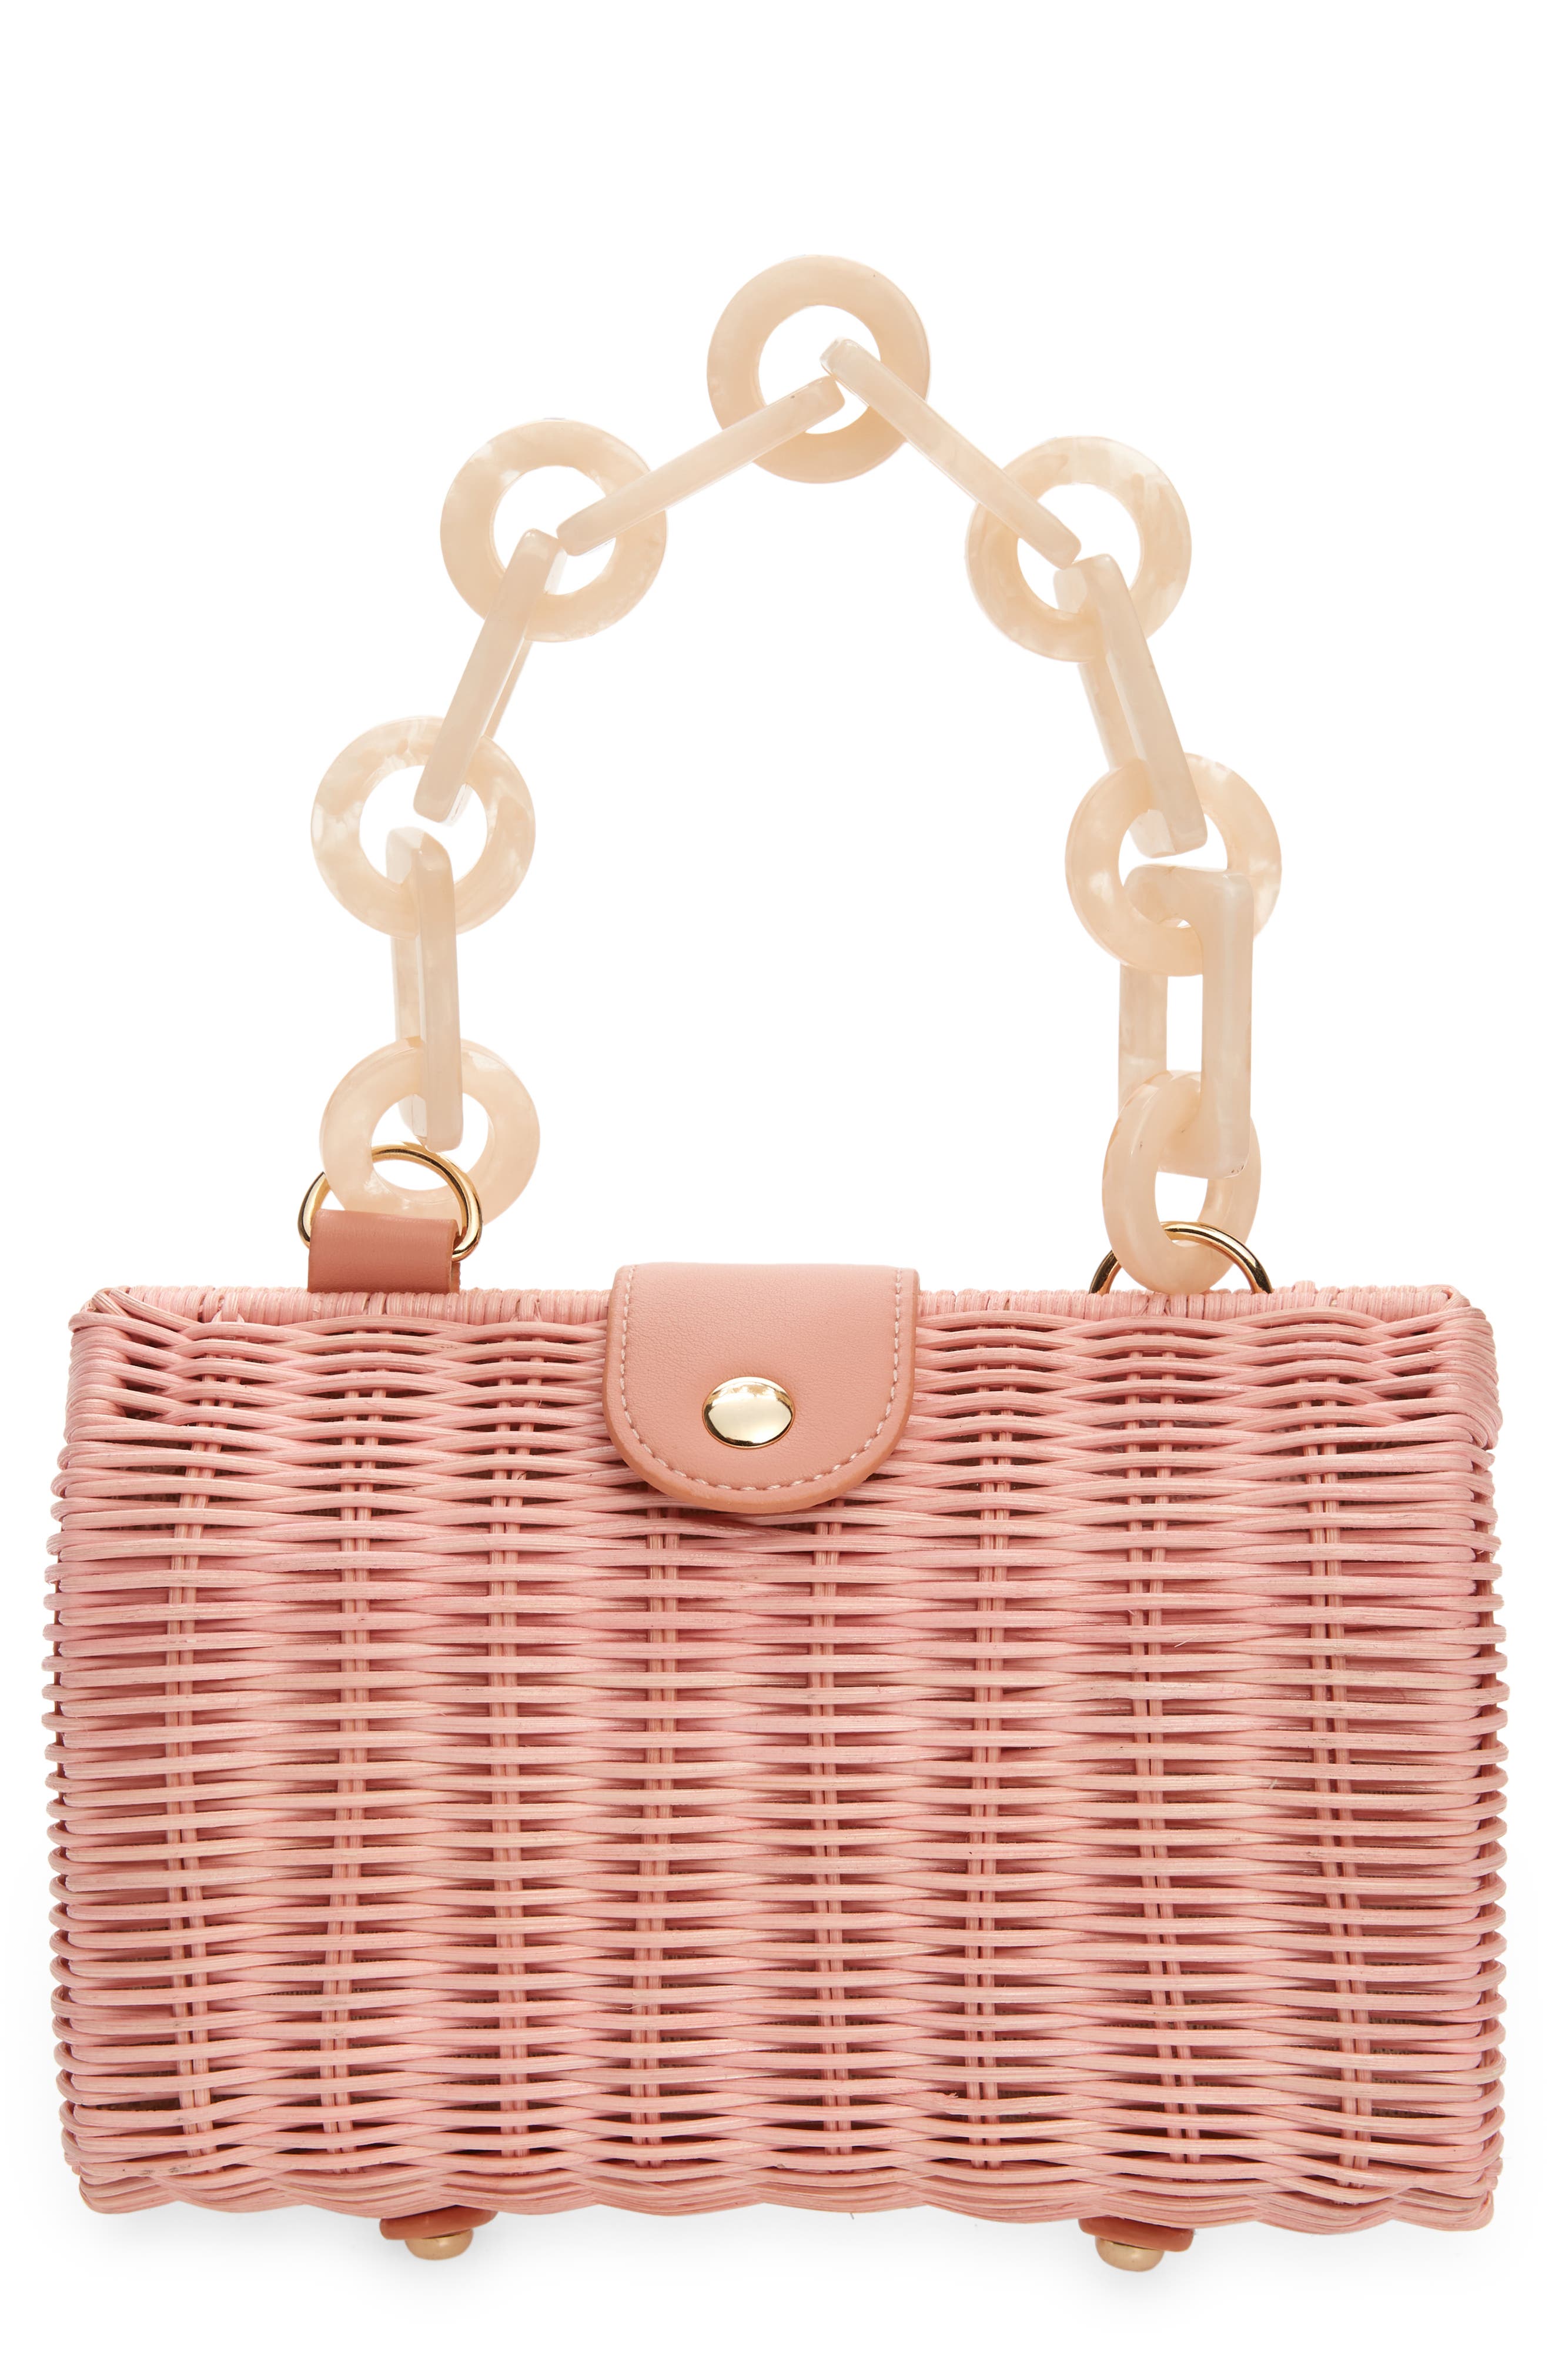 btb Los Angeles Page Wicker Clutch in Pink